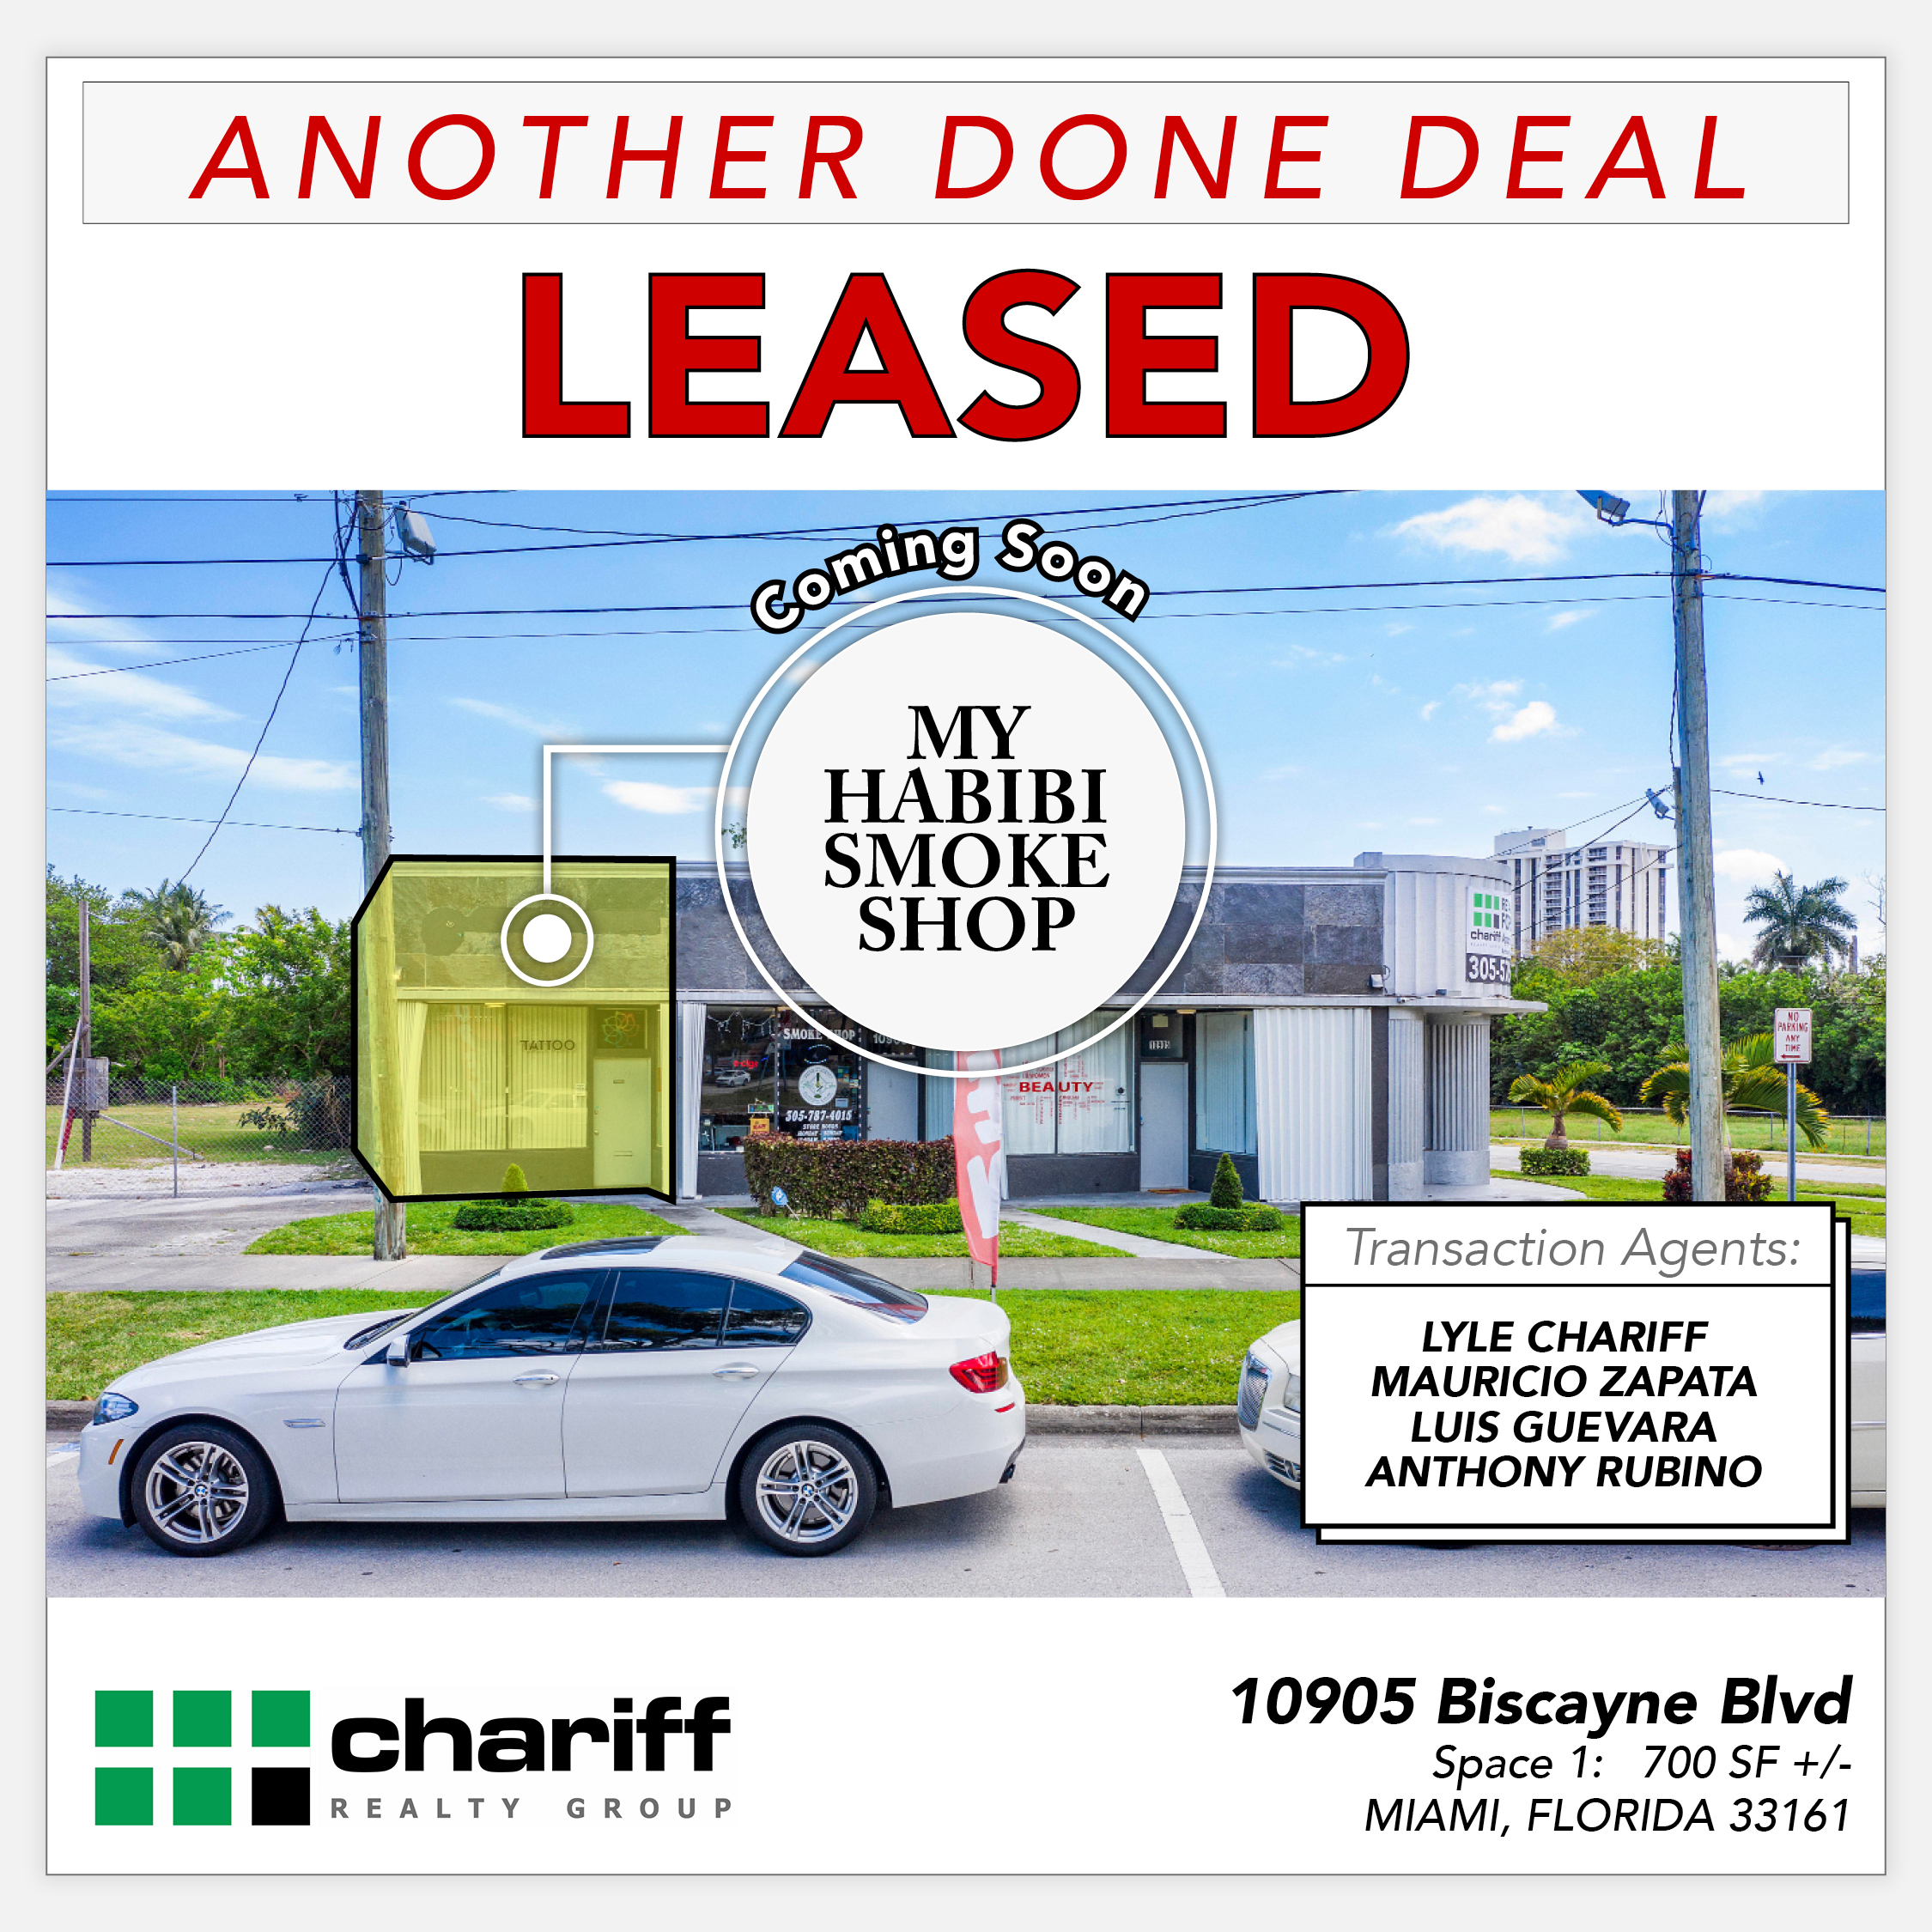 10905 Biscayne Blvd - Another Done Deal-Sold-North Miami - Miami-Florida -33161 -Chariff Realty Group